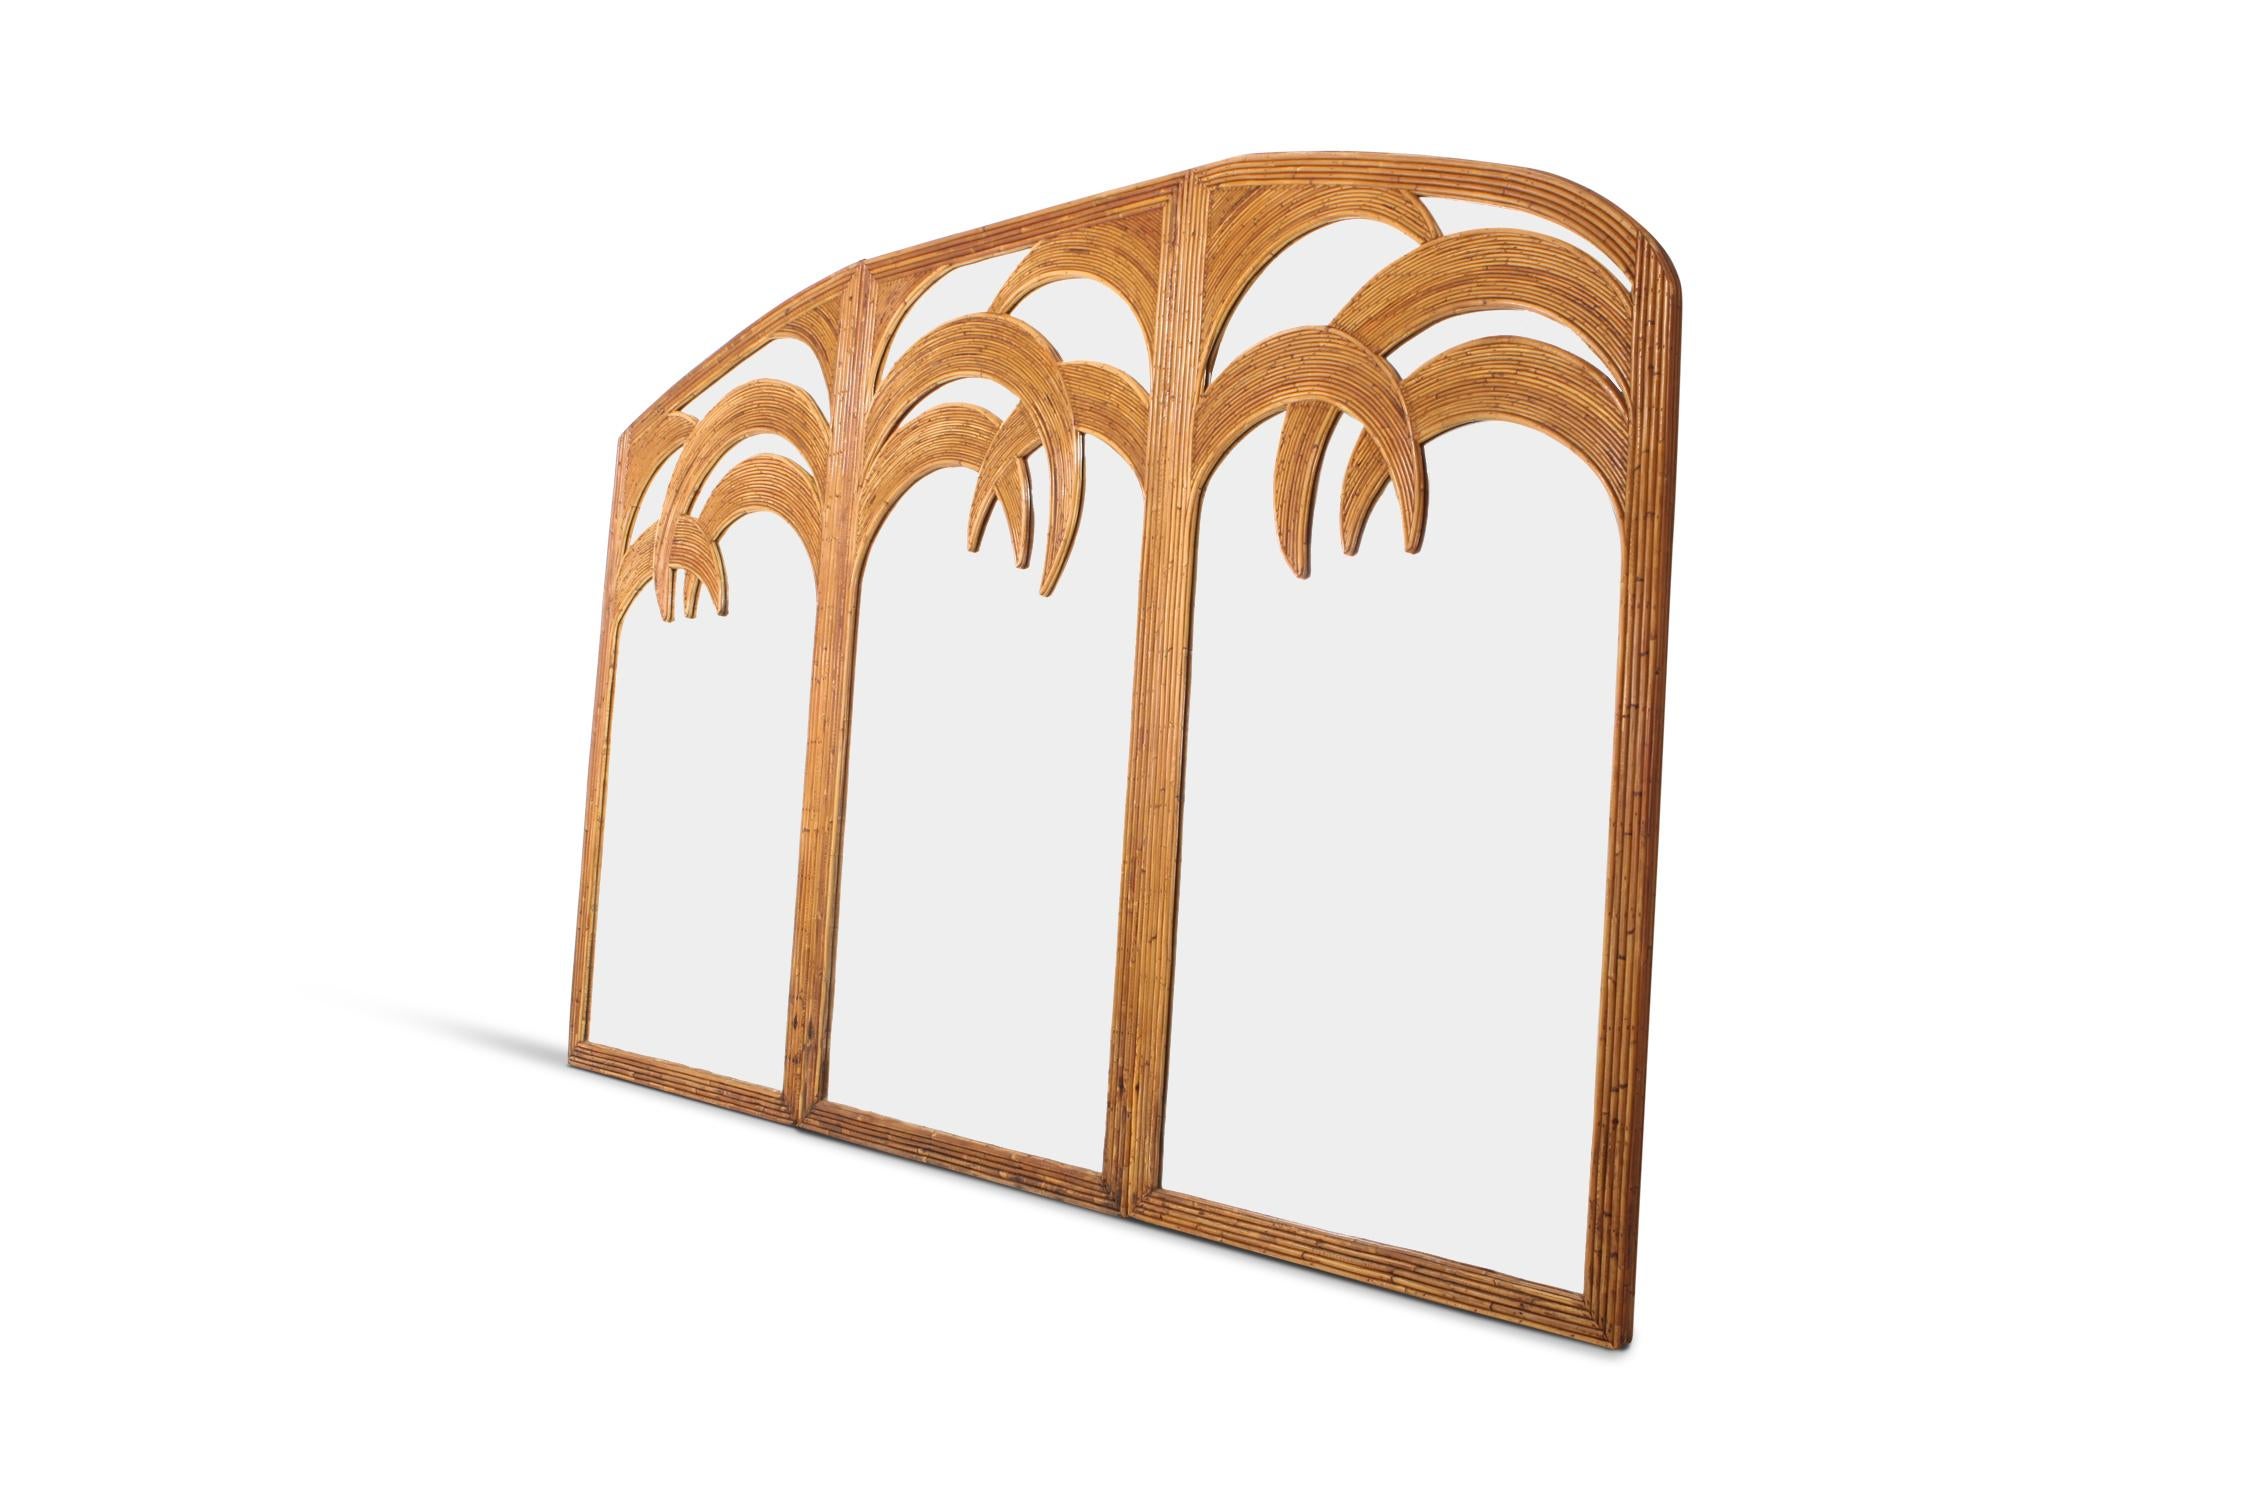 Hollywood Regency Gabriella Crespi style mirror in bamboo by Vivai del Sud.
Italy, 1970s.
Great Italian glam piece that fits well in an eclectic interior. We've added an interior by Lucia Tait Tolani from Hong Kong who uses a piece like this in a